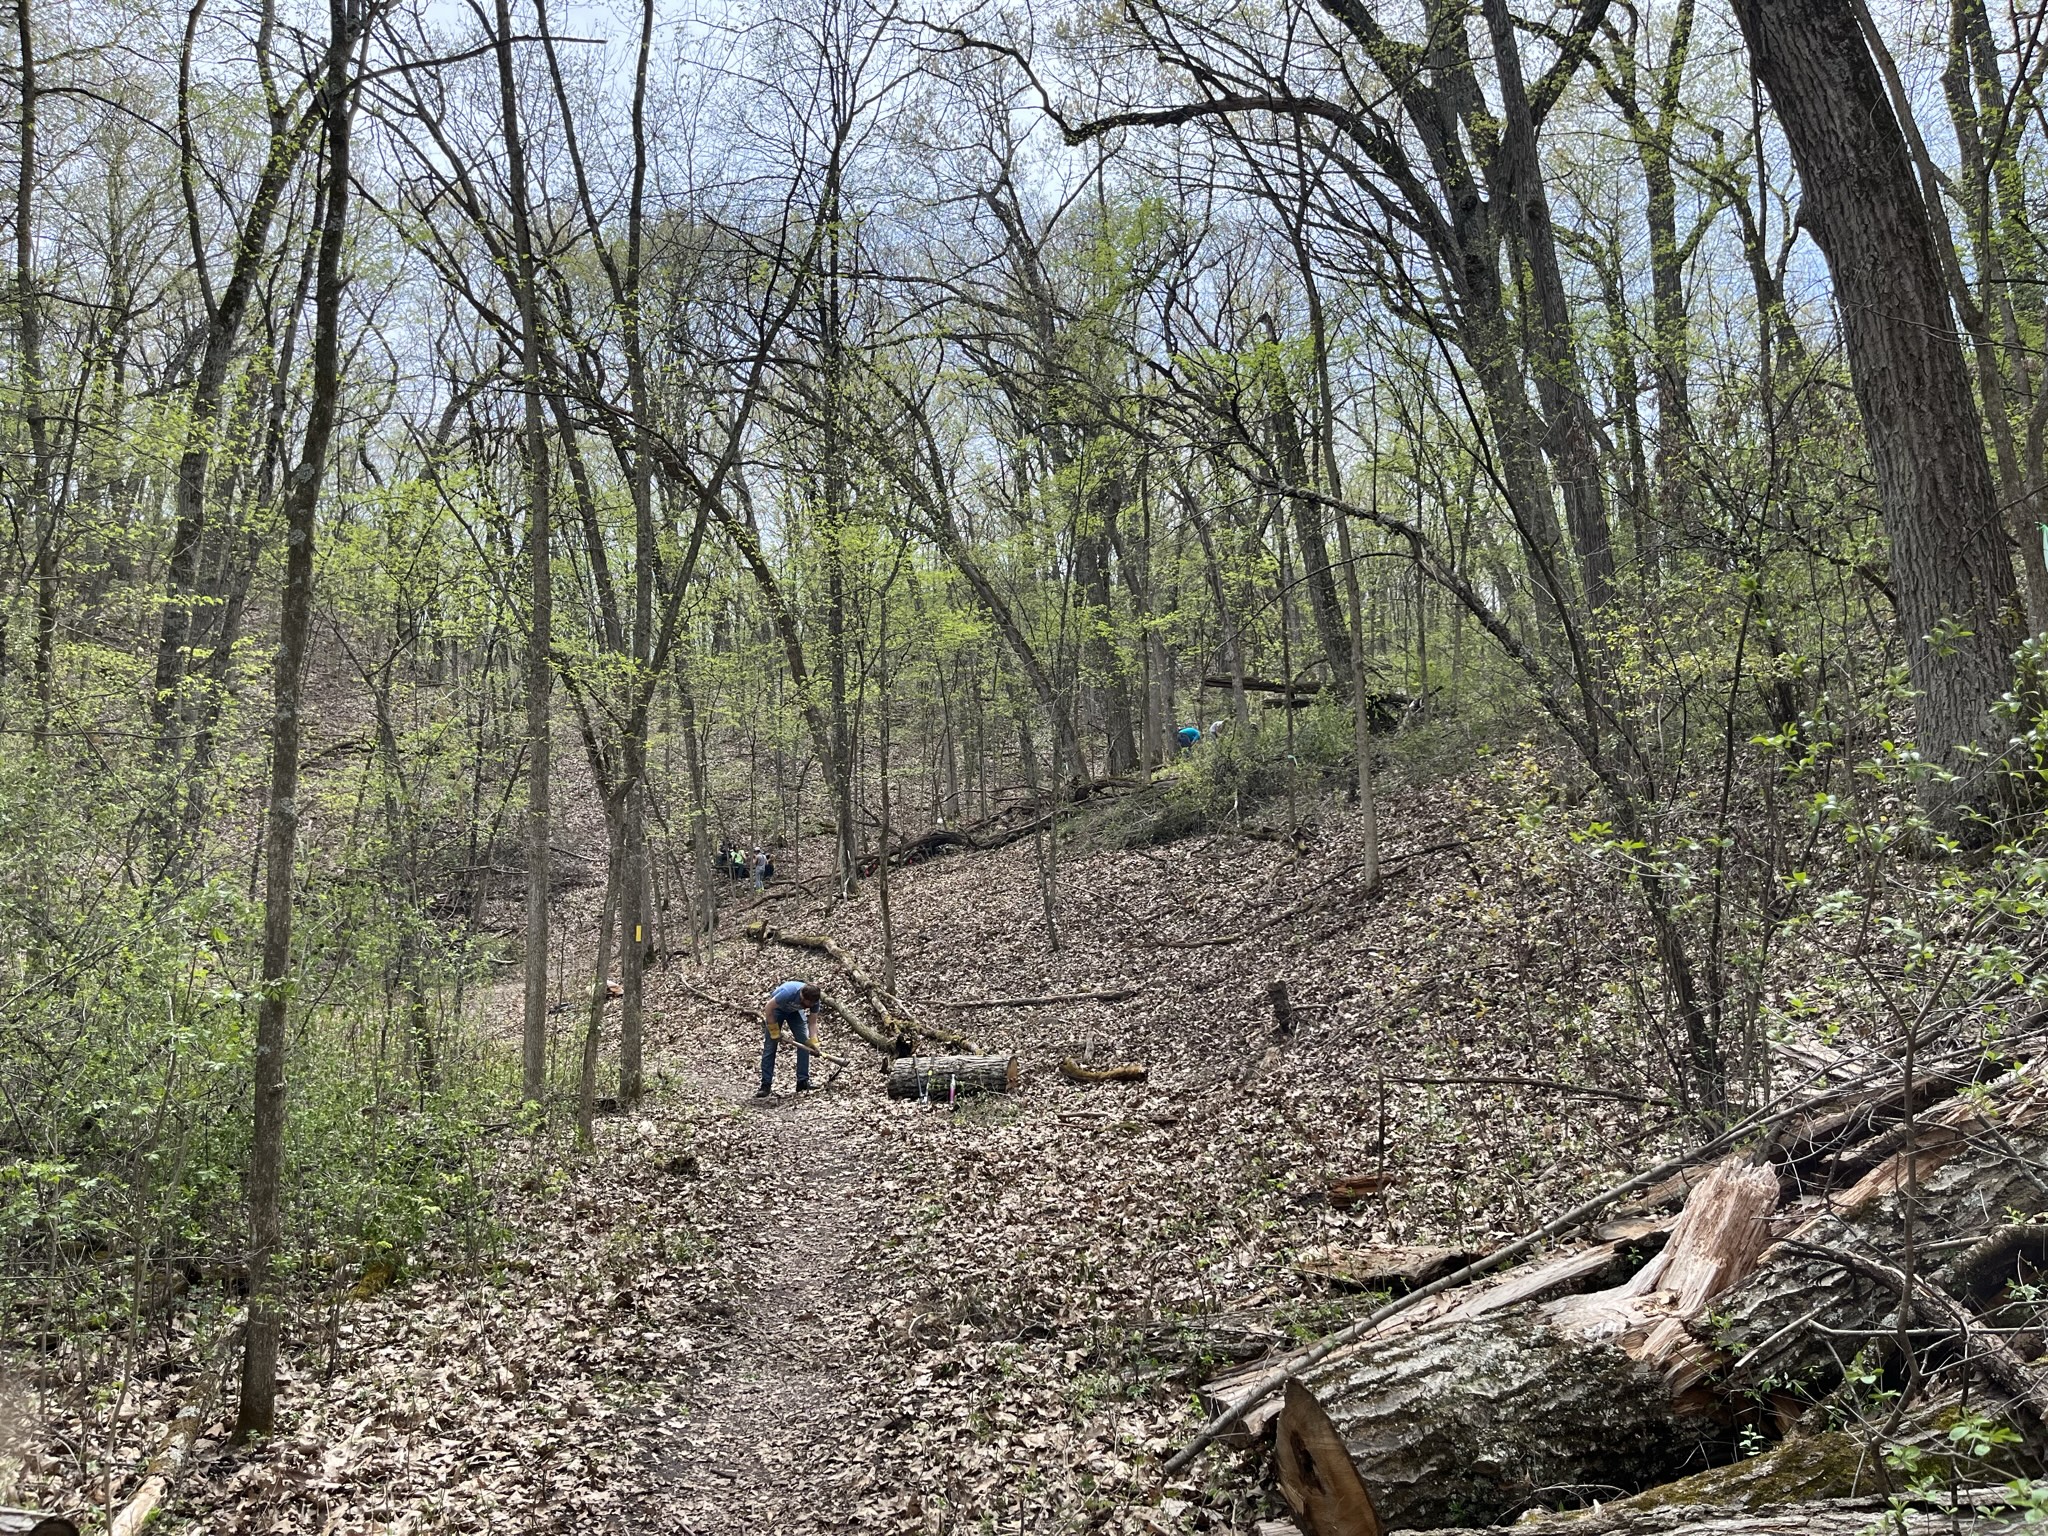 "Sweeping" the trail on the Scuppernong Segment by clearing invasives, restoring habitat, enhancing scenic views, and repairing tread.